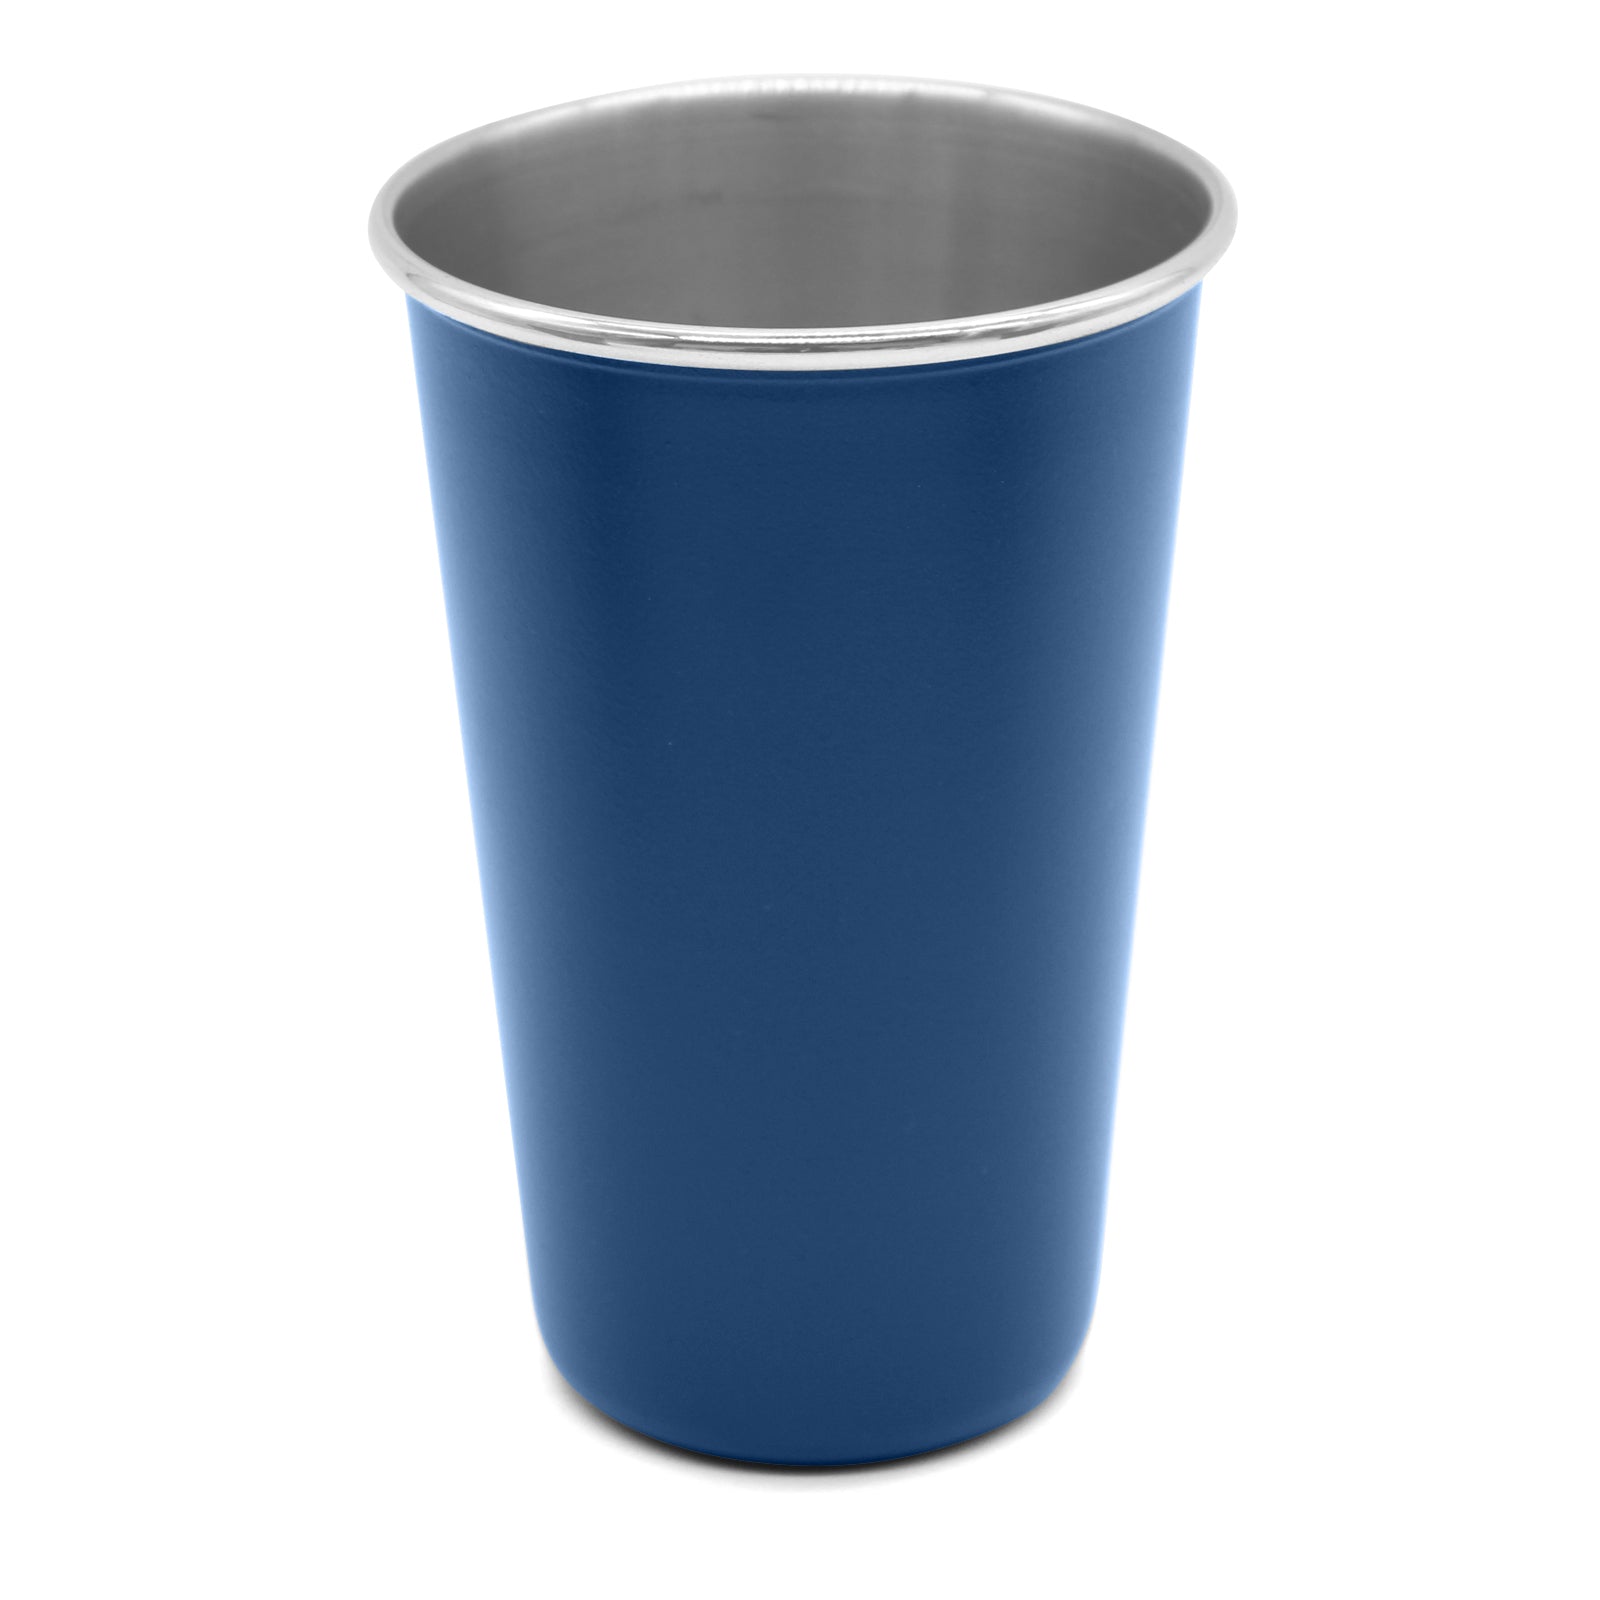 Stainless Steel Blue Tumbler Cup for Camping and Fishing